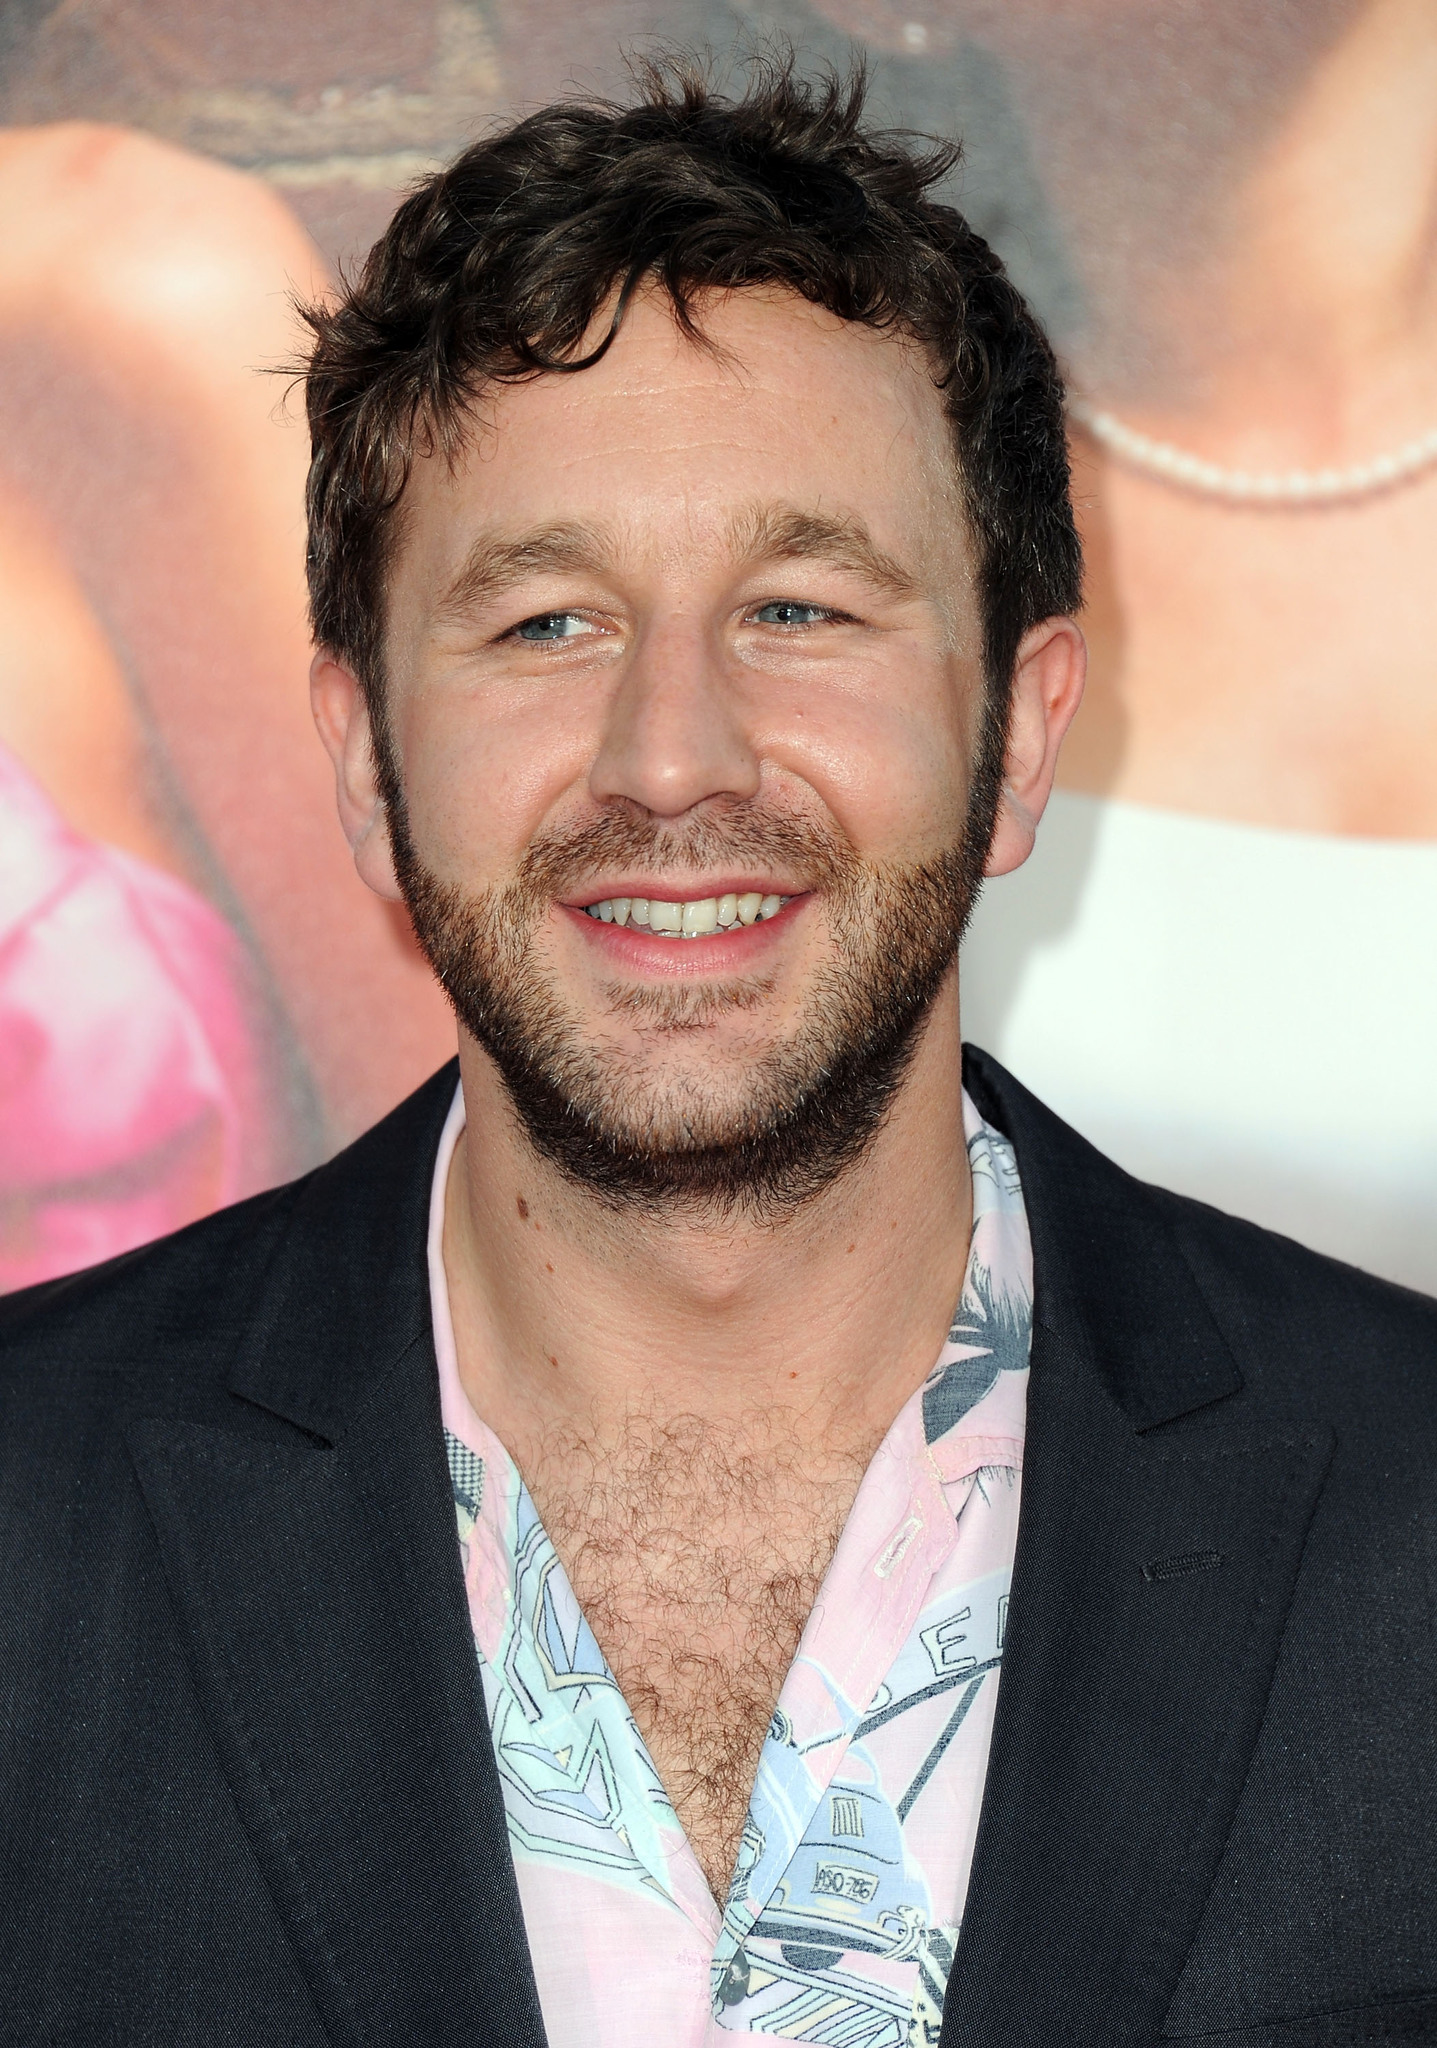 Chris O'Dowd at event of Sunokusios pamerges (2011)